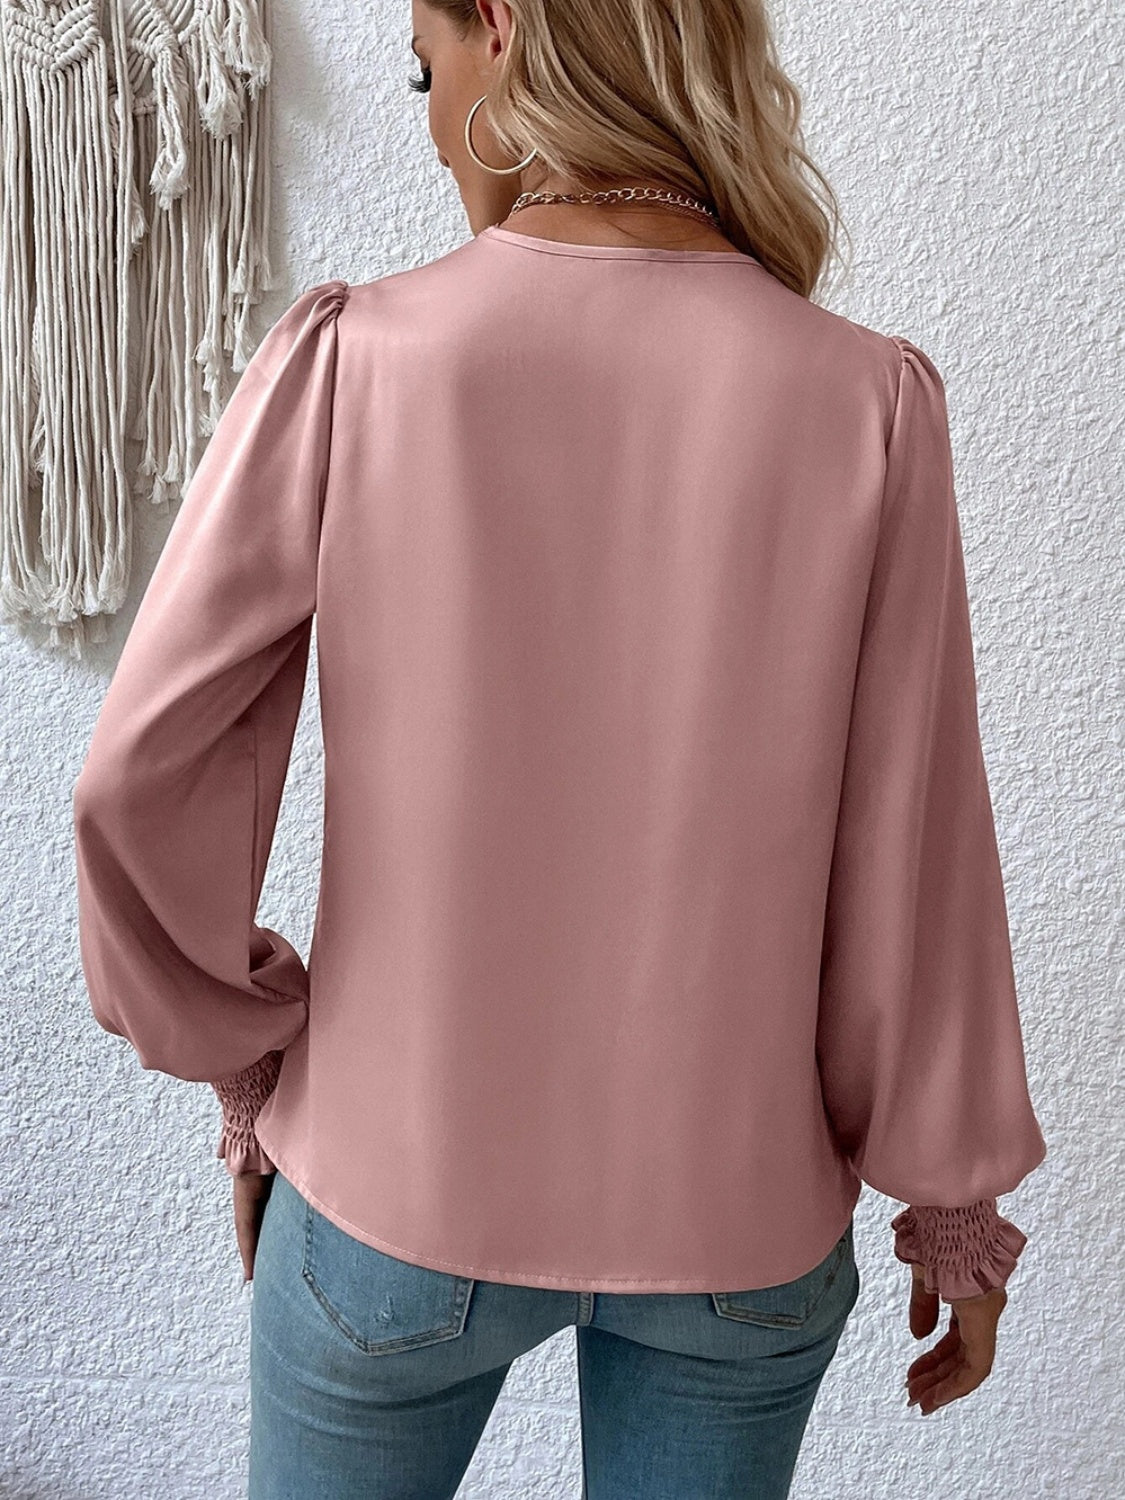 Surplice Smocked Lantern Sleeve Blouse - Women’s Clothing & Accessories - Shirts & Tops - 11 - 2024